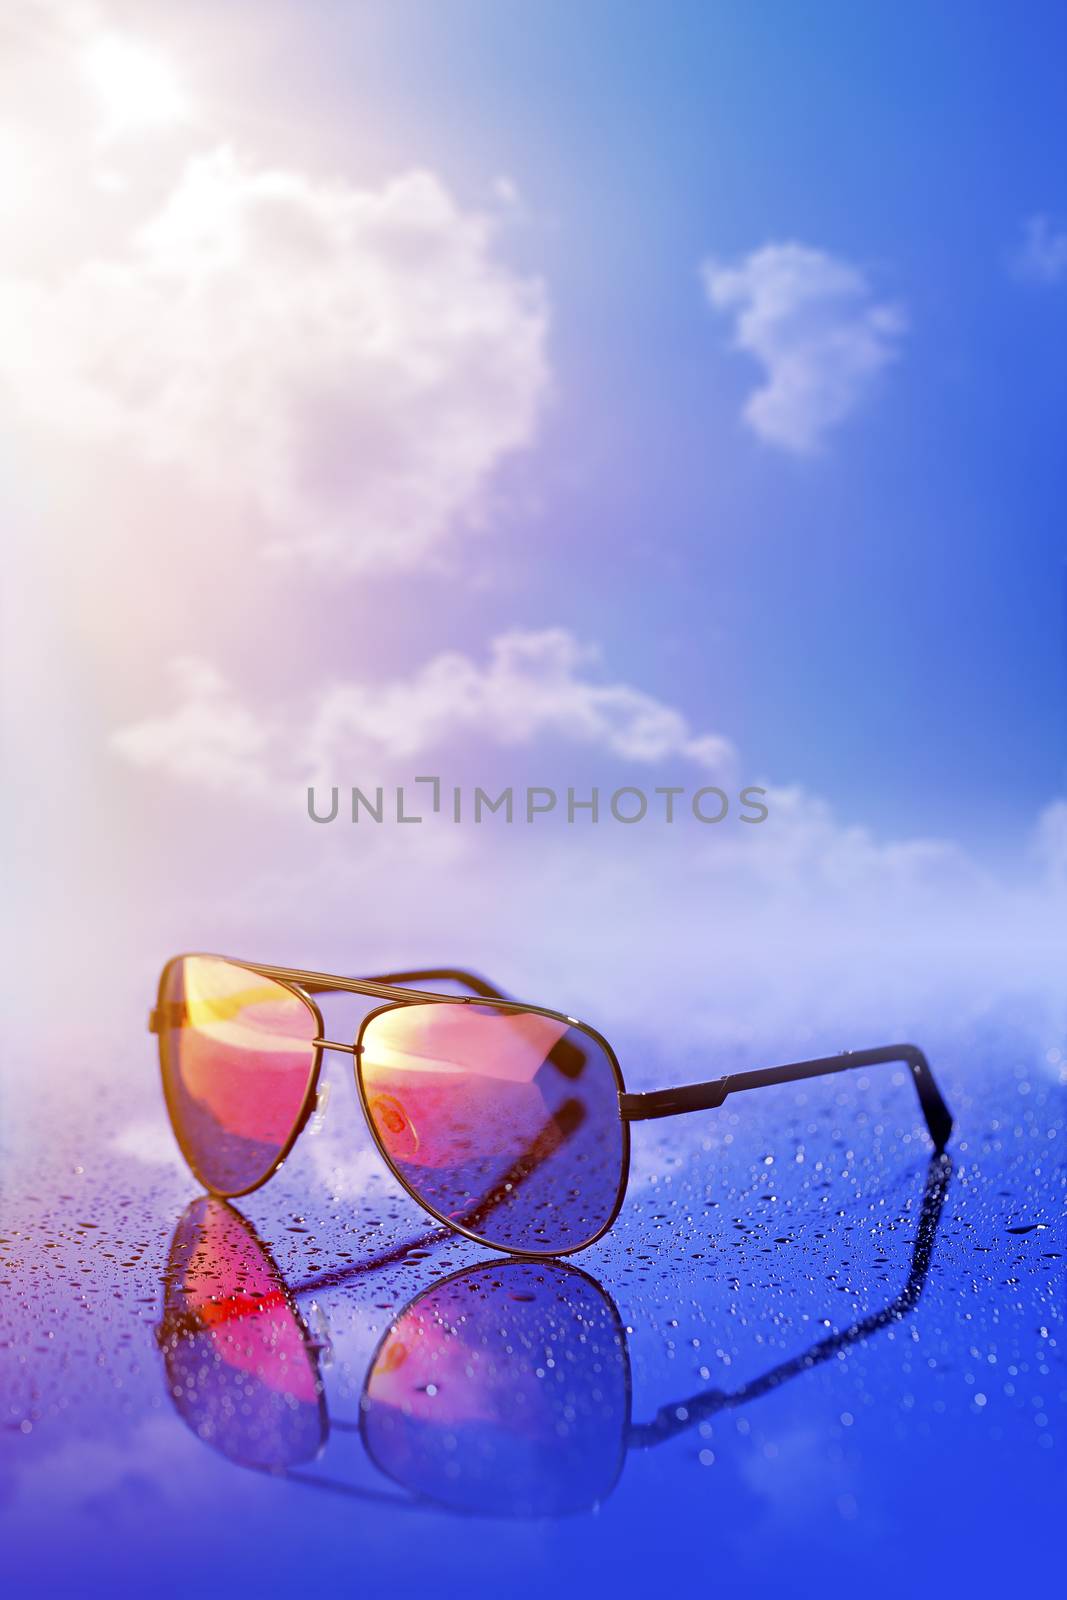 Shades by Stocksnapper